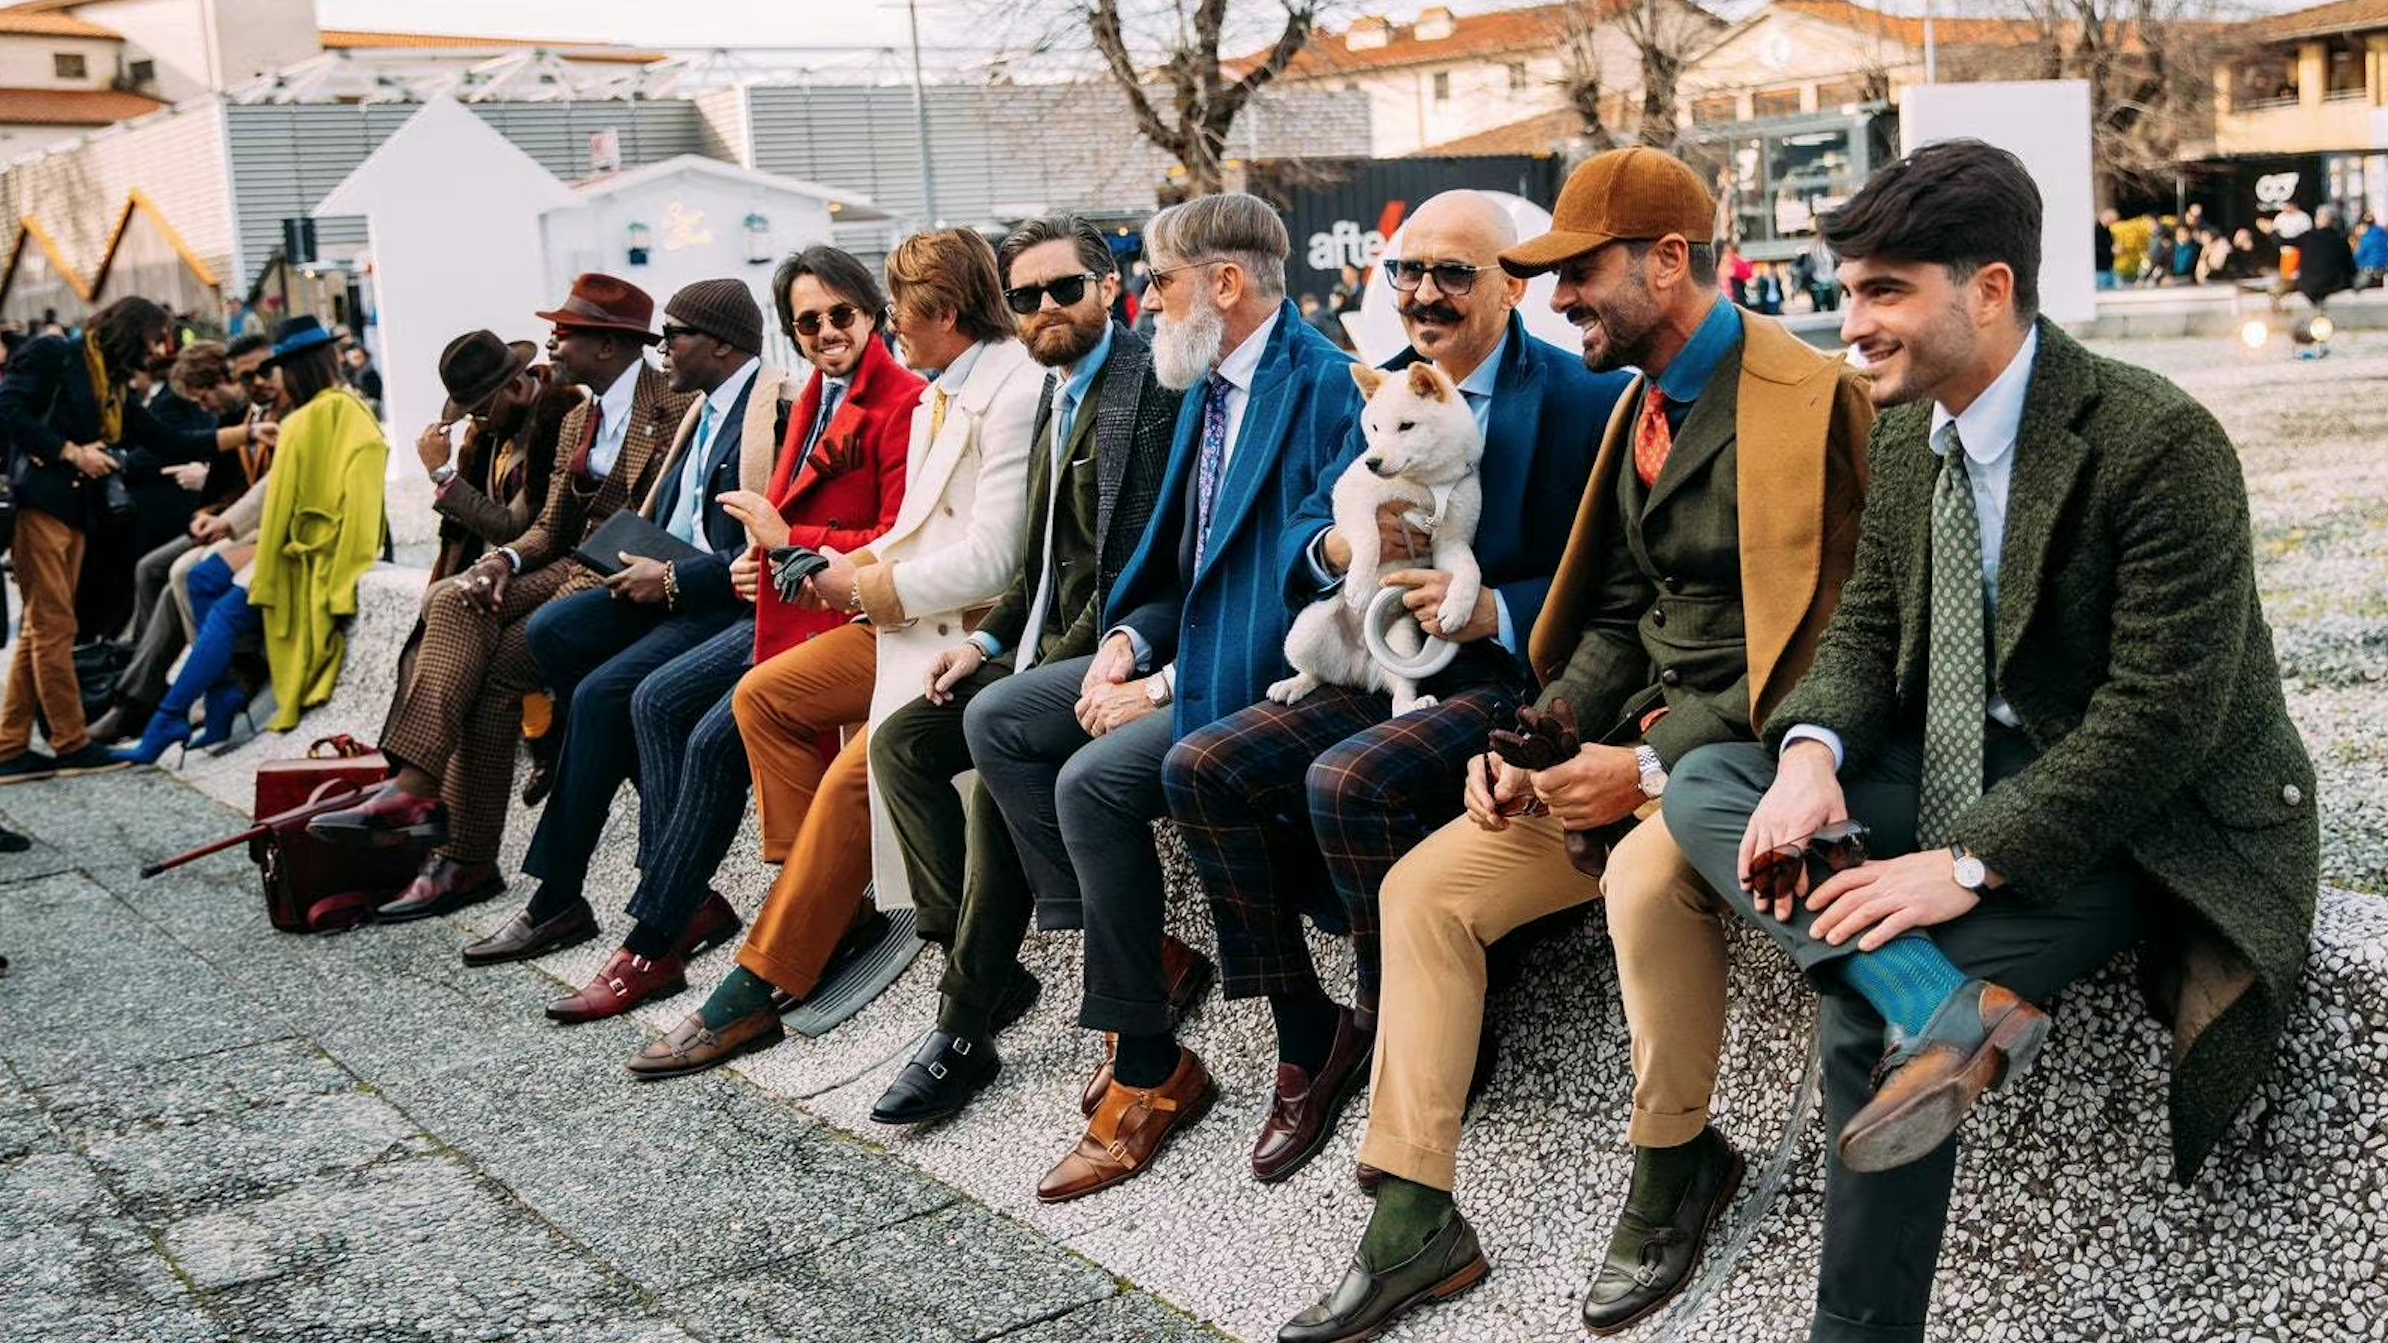 China’s menswear market is expected to grow annually by 8.5 percent. Jing Daily speaks to the brands at Pitti Uomo to understand their plans for the recently reopened country. Image: Weibo